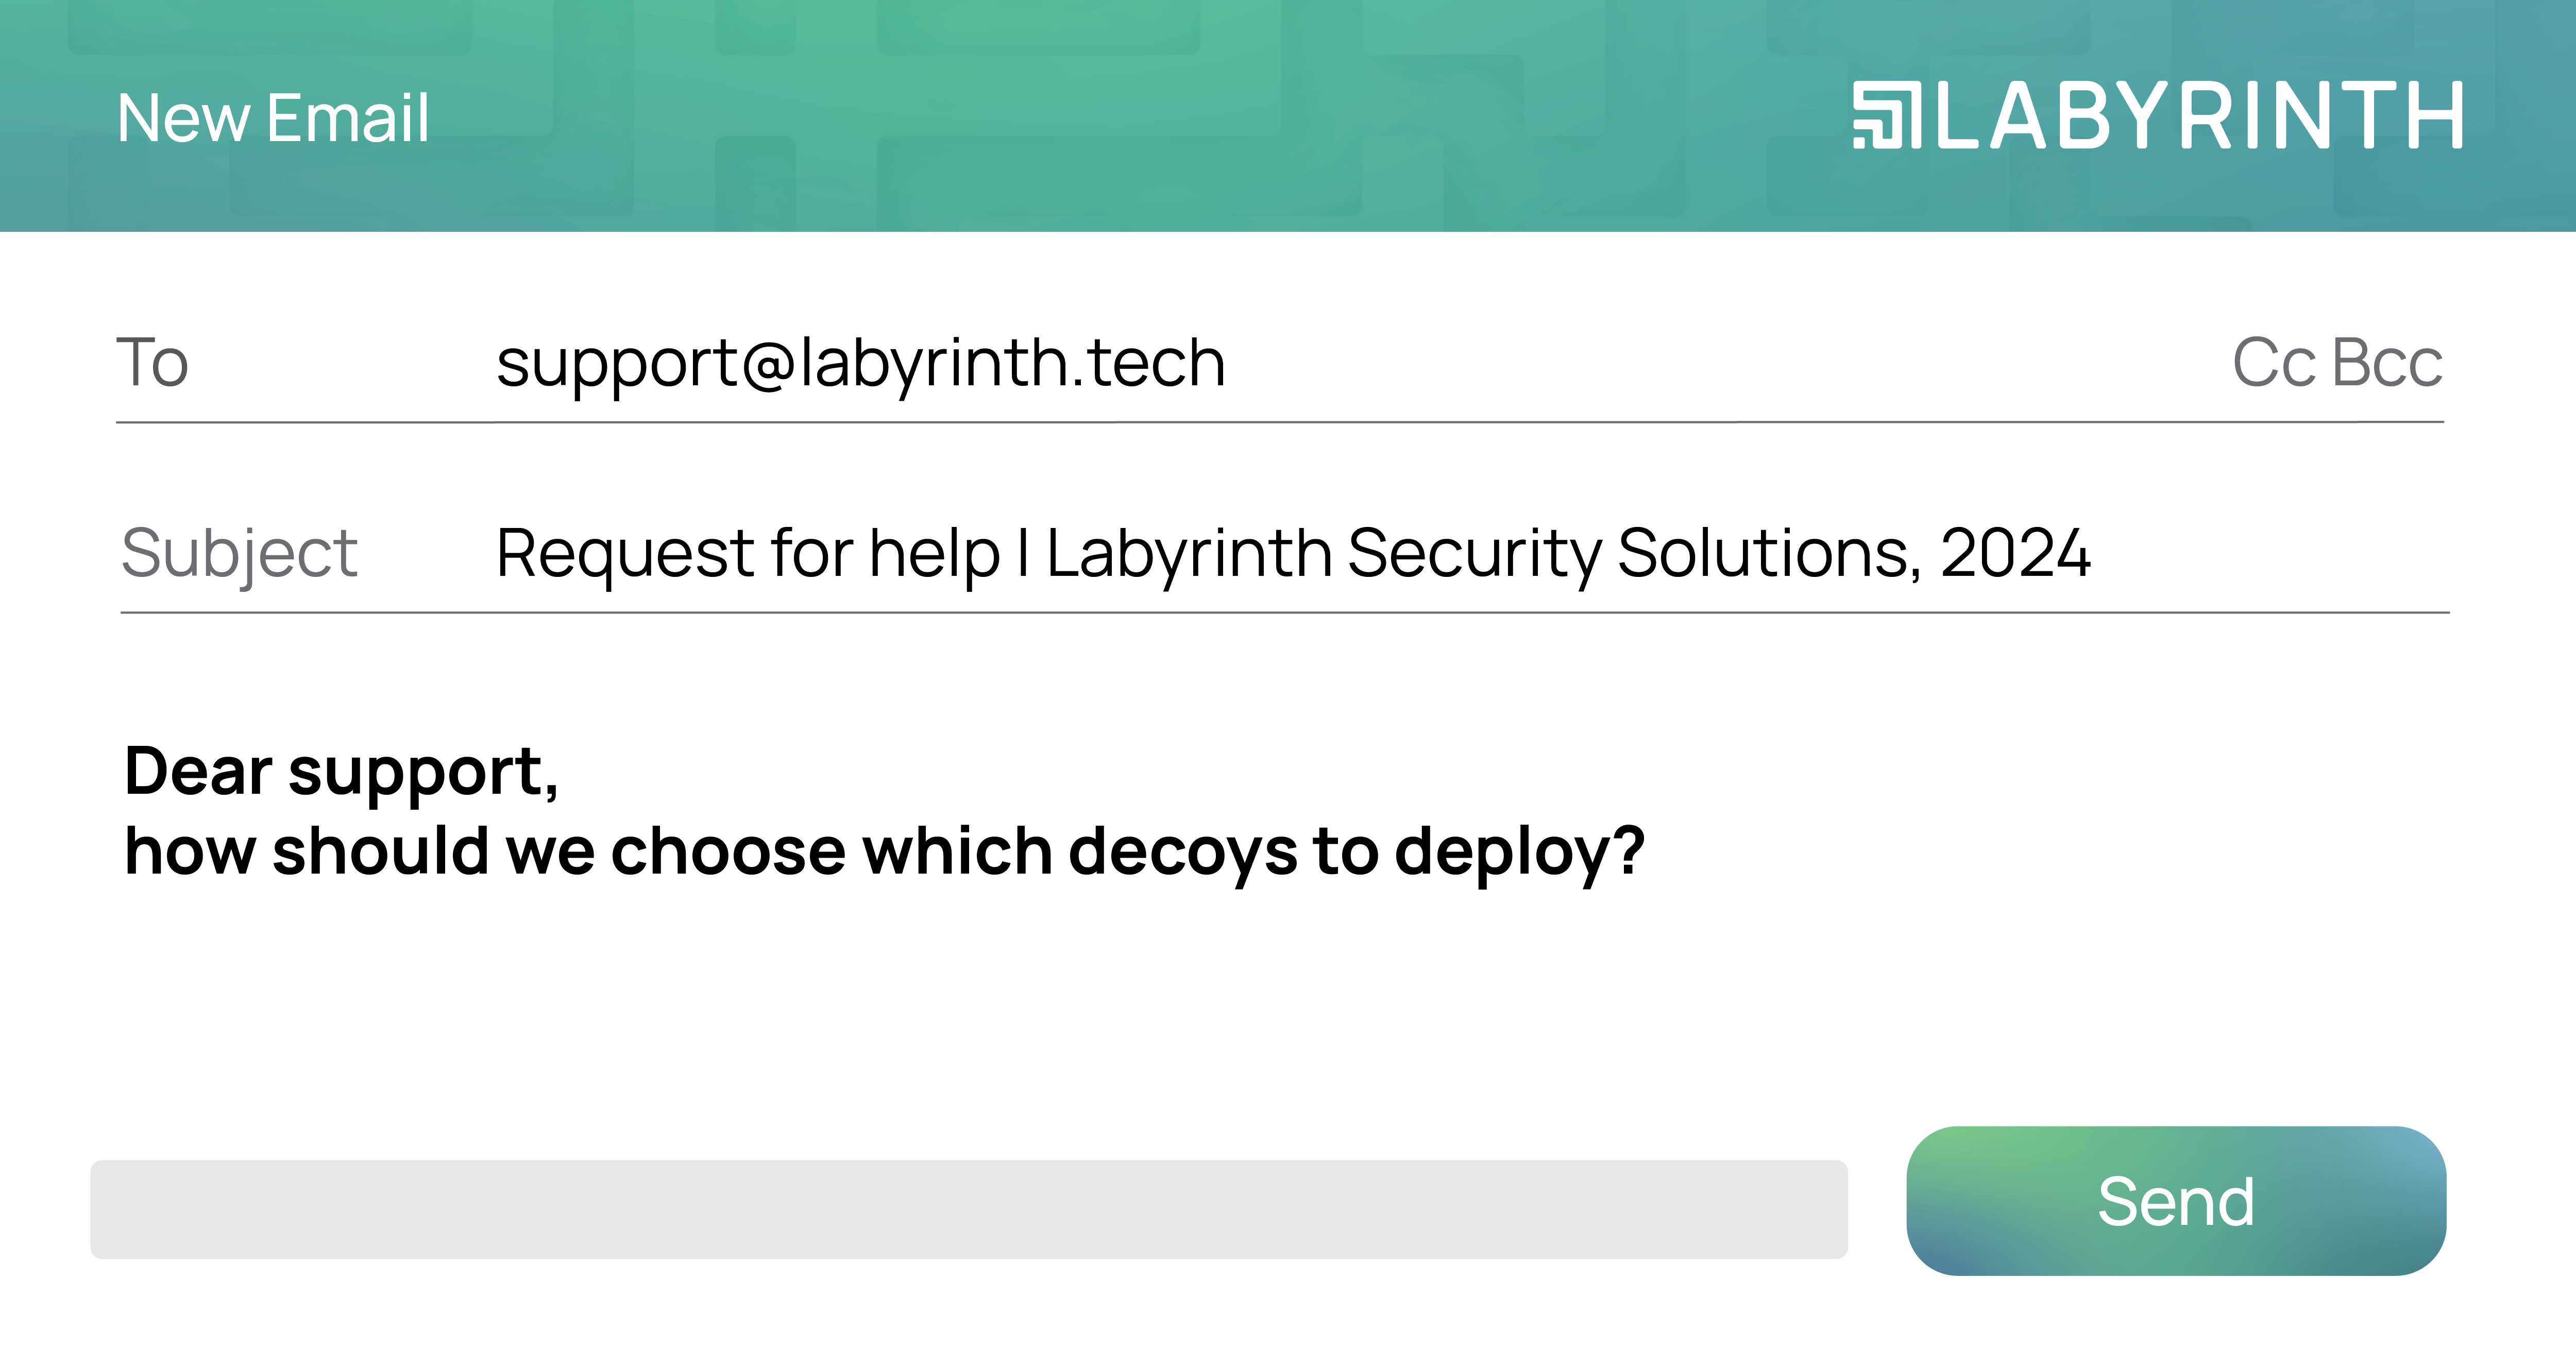 Dear support, how should we choose which decoys to deploy?